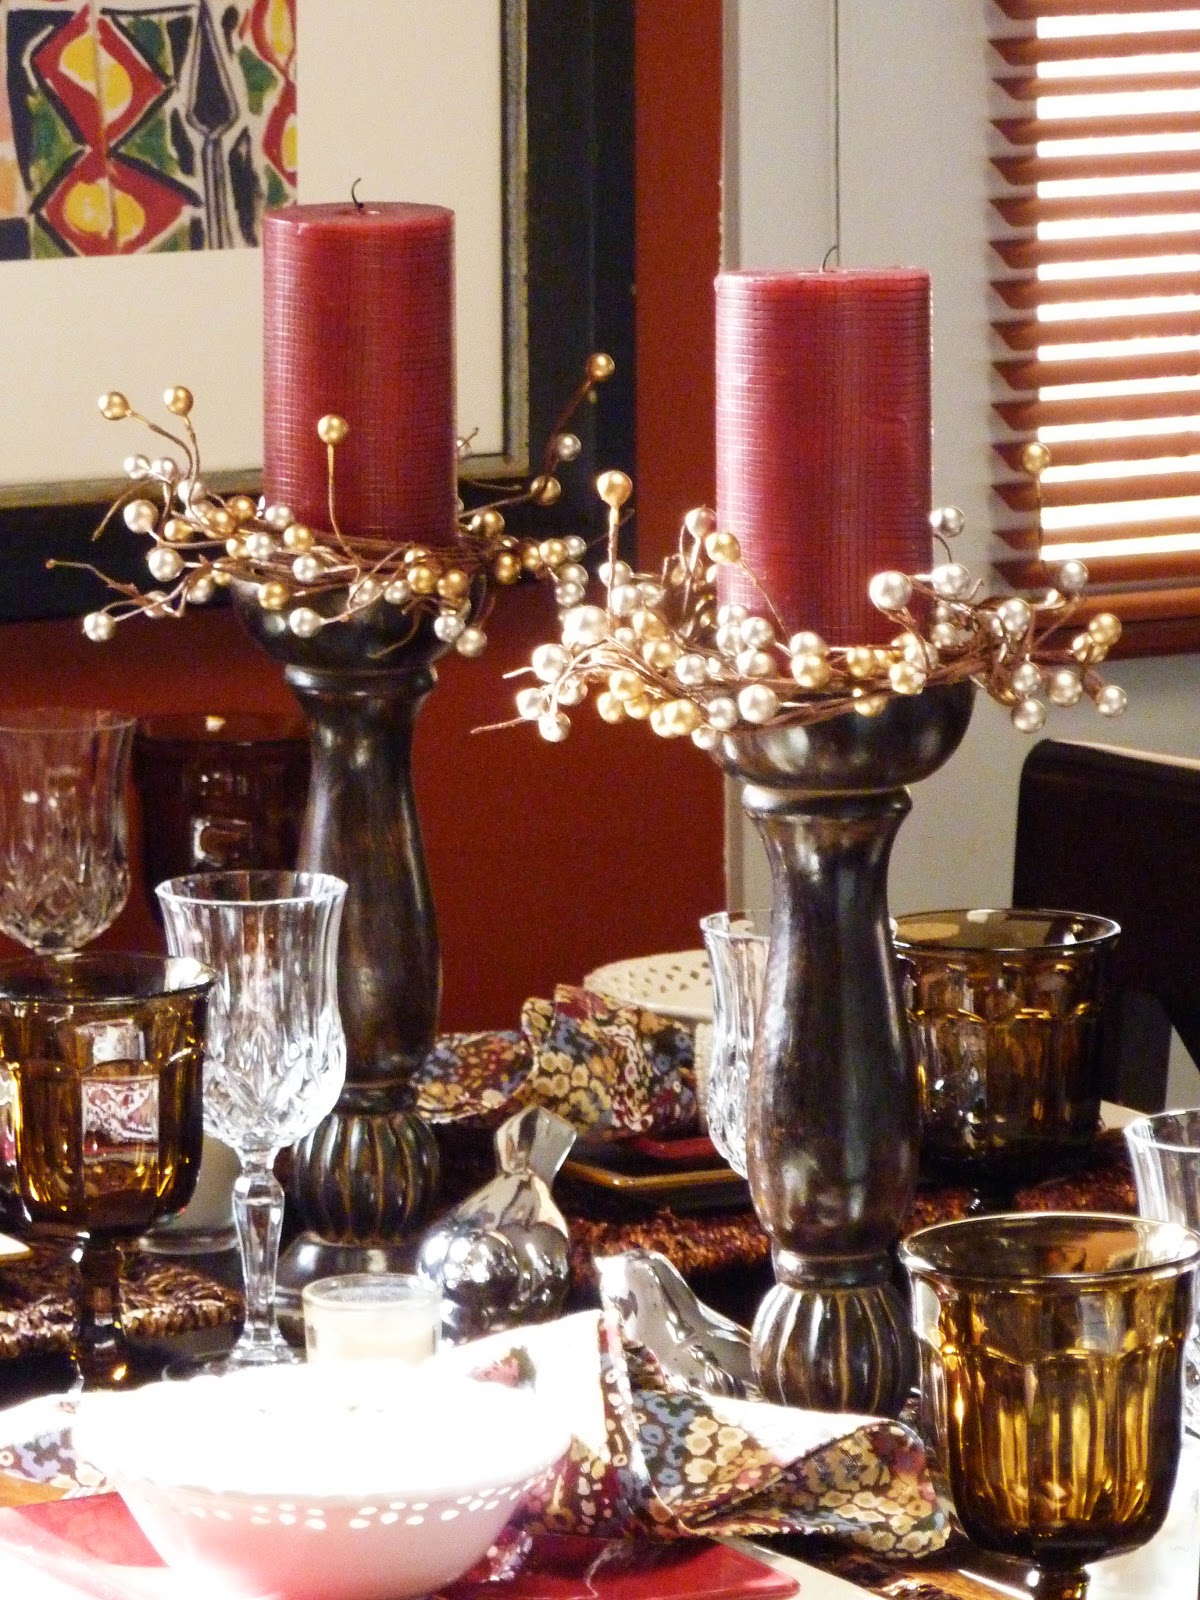 Creating Wonderful Spaces: An Un-Holiday Table!